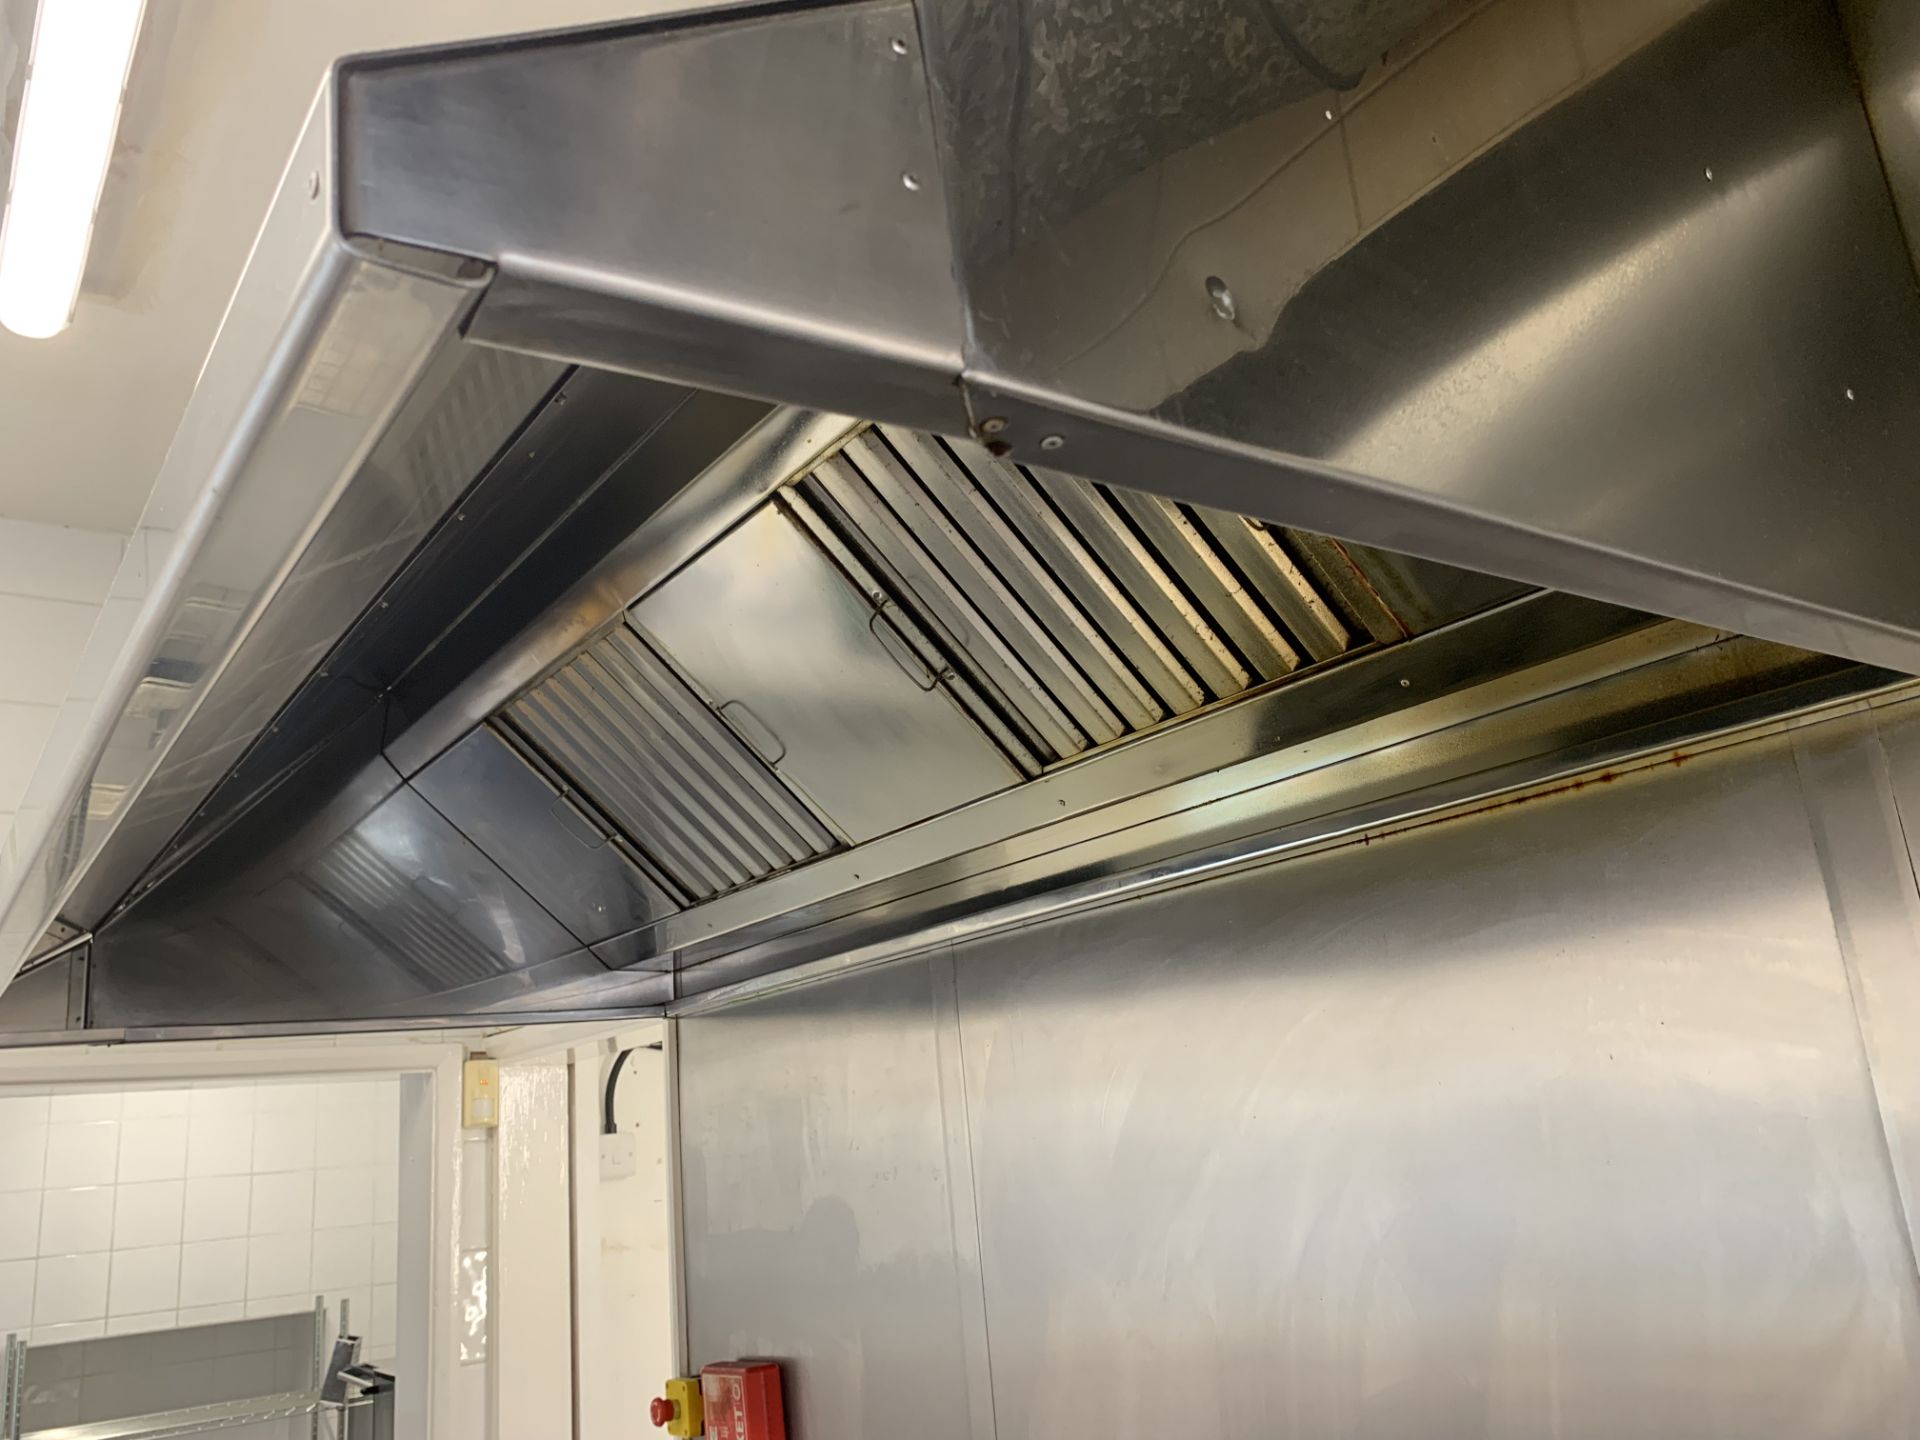 Stainless Steel Extraction Canopy with filters 183cm w x 96cm d x 50cm h - Image 4 of 4